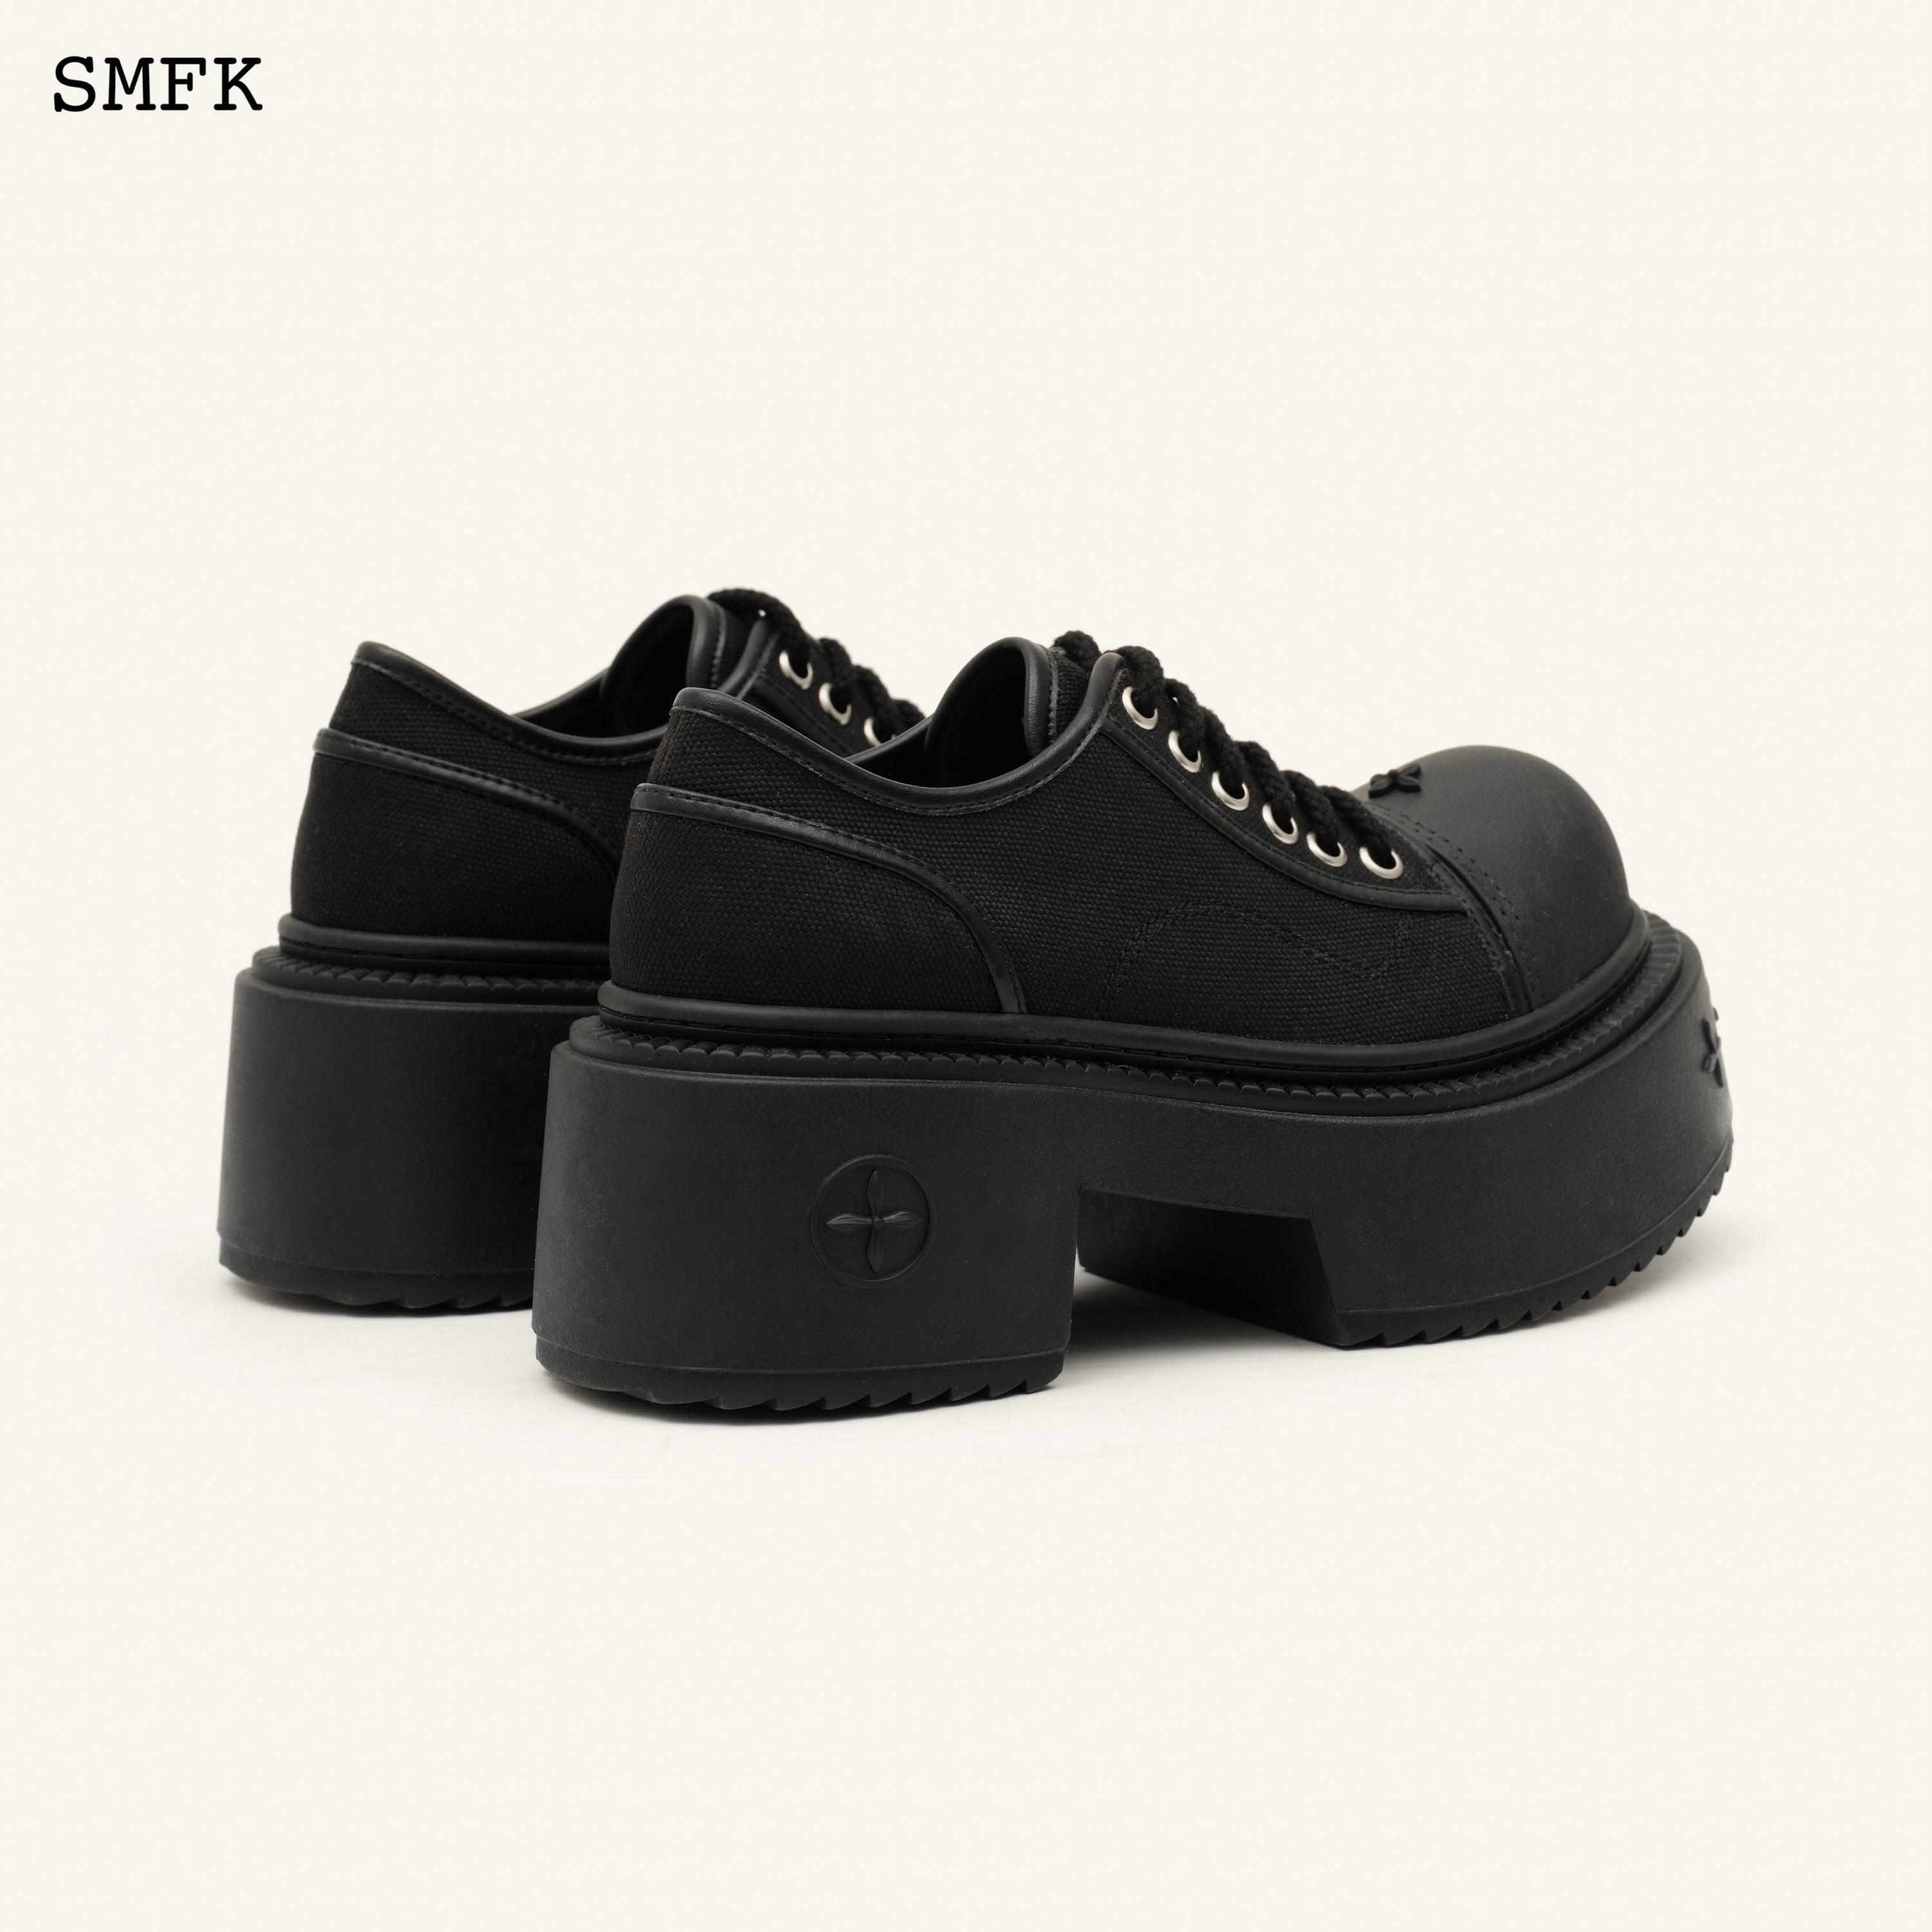 Compass Rider Low-Top Boots In Black - SMFK Official